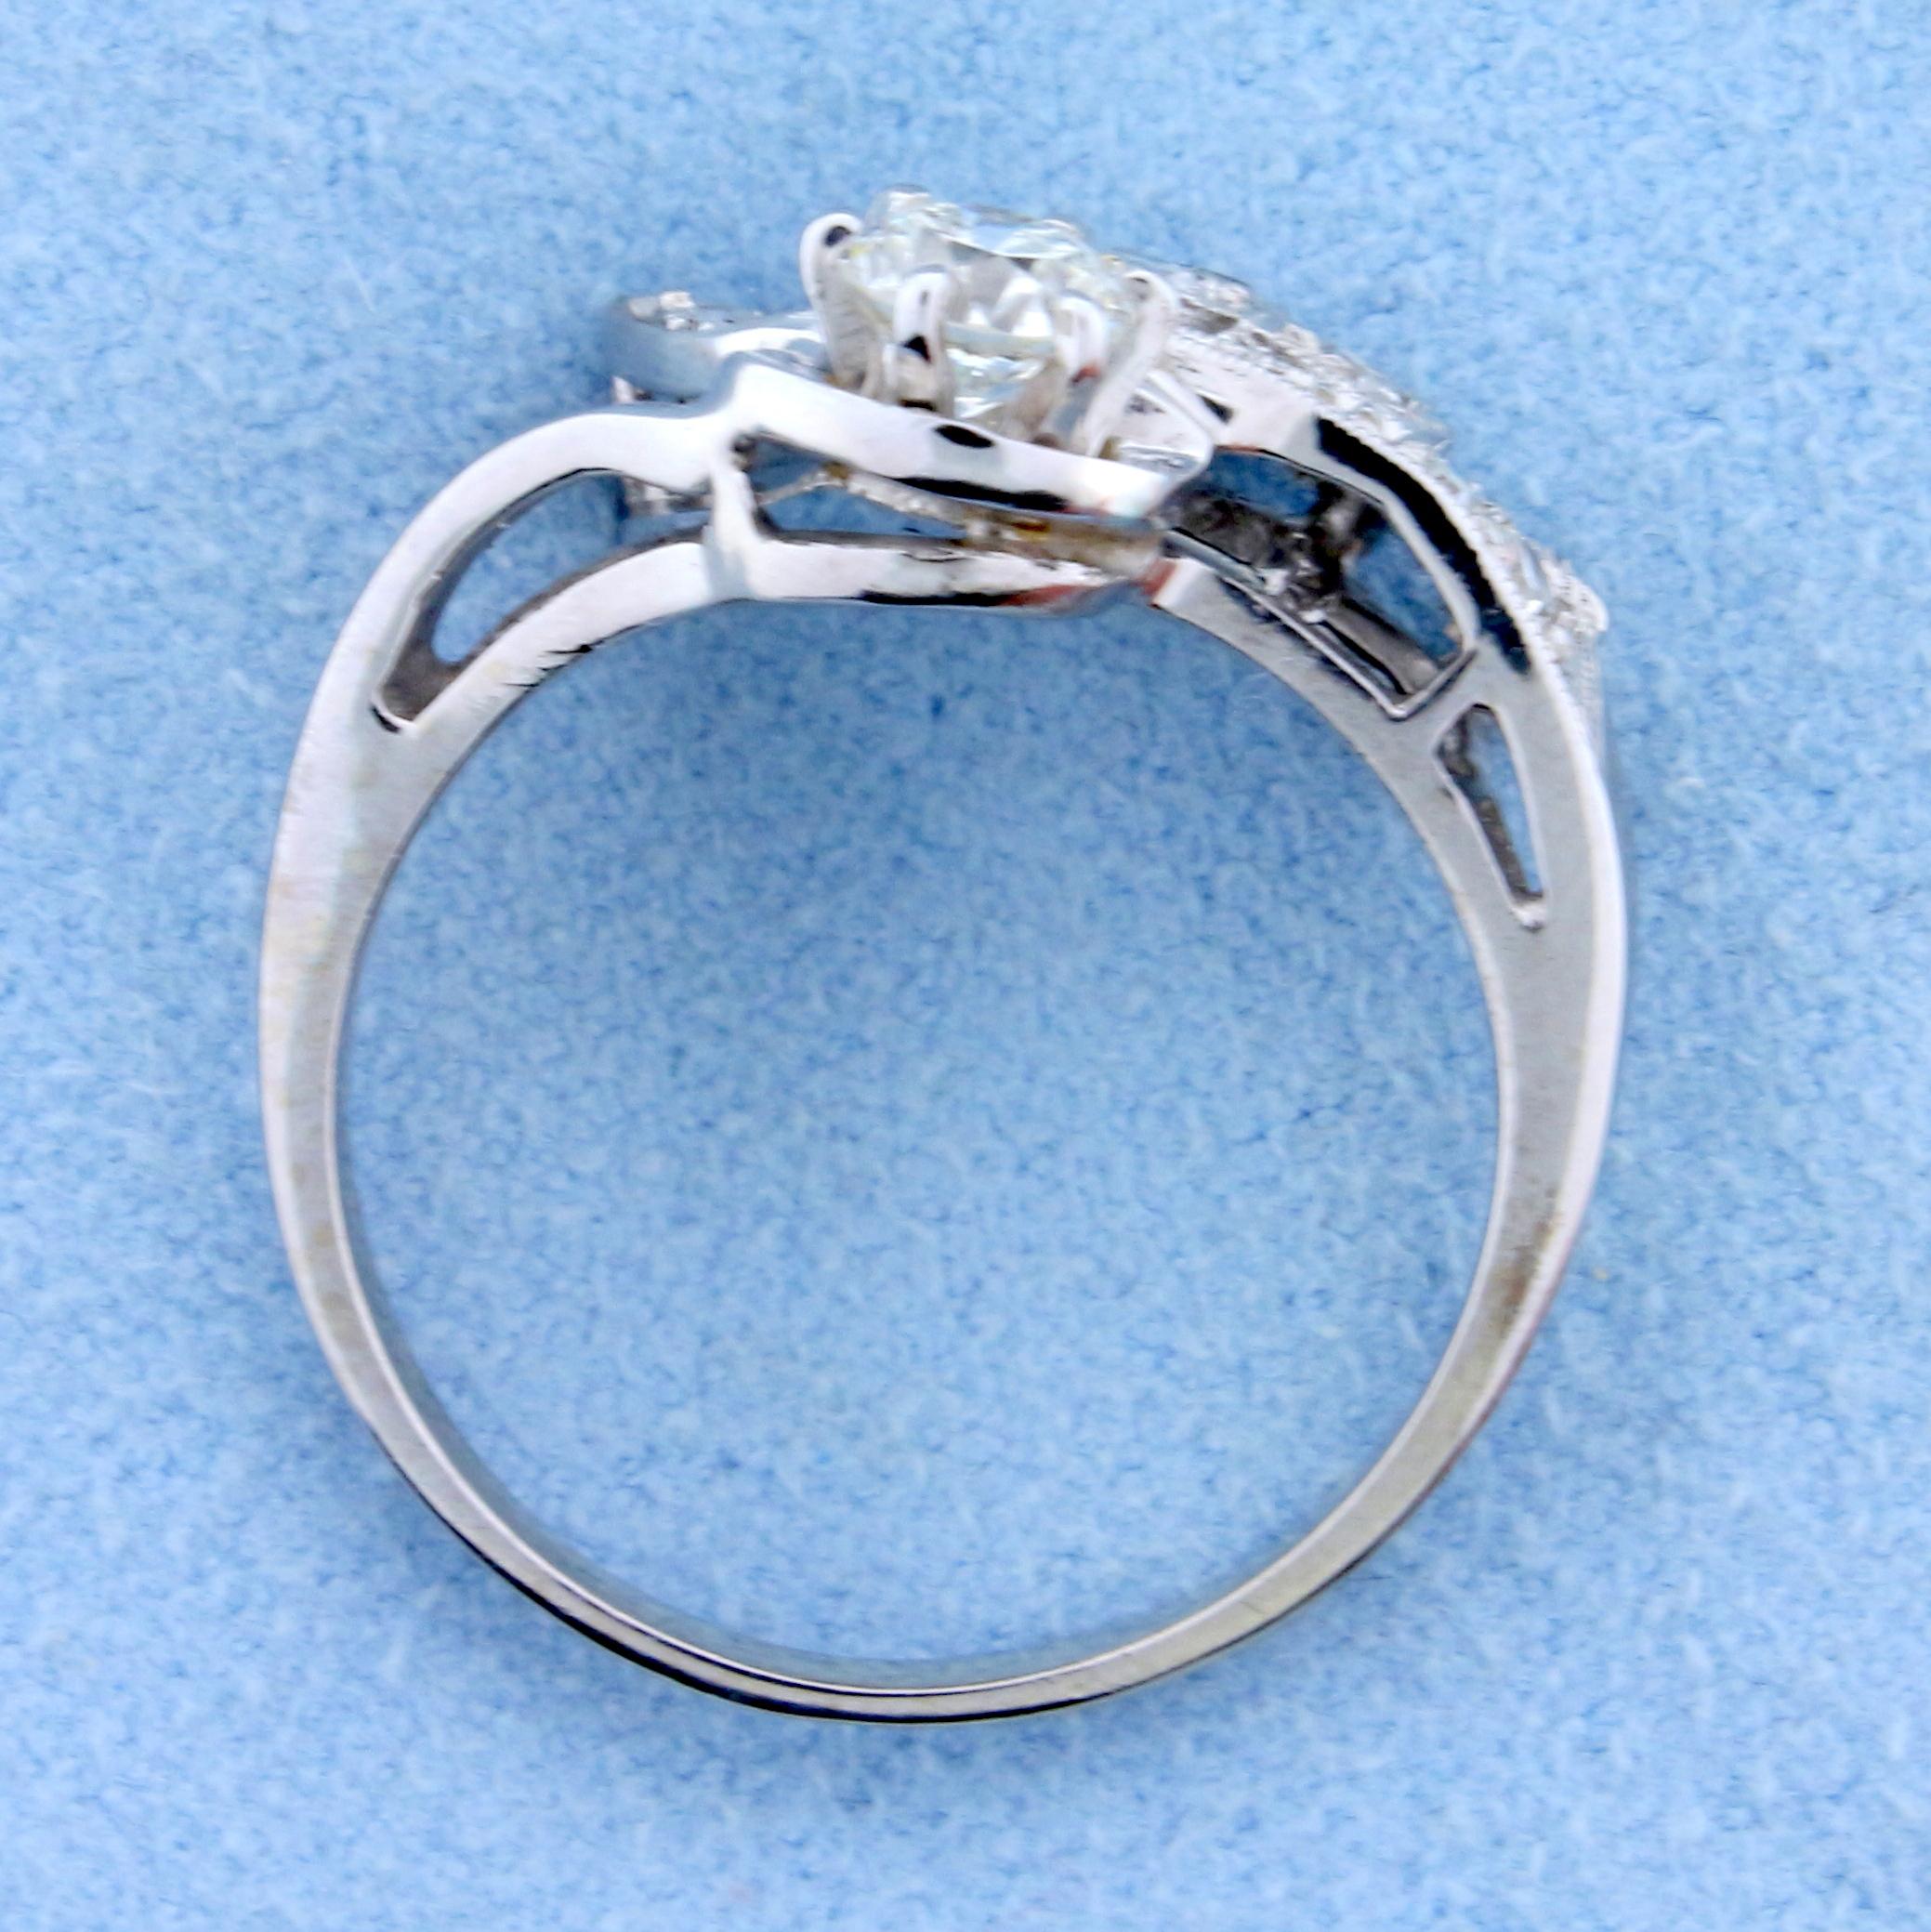 Antique 1/2 Ct Total Weight Old European Cut Diamond Ring In 14k White Gold